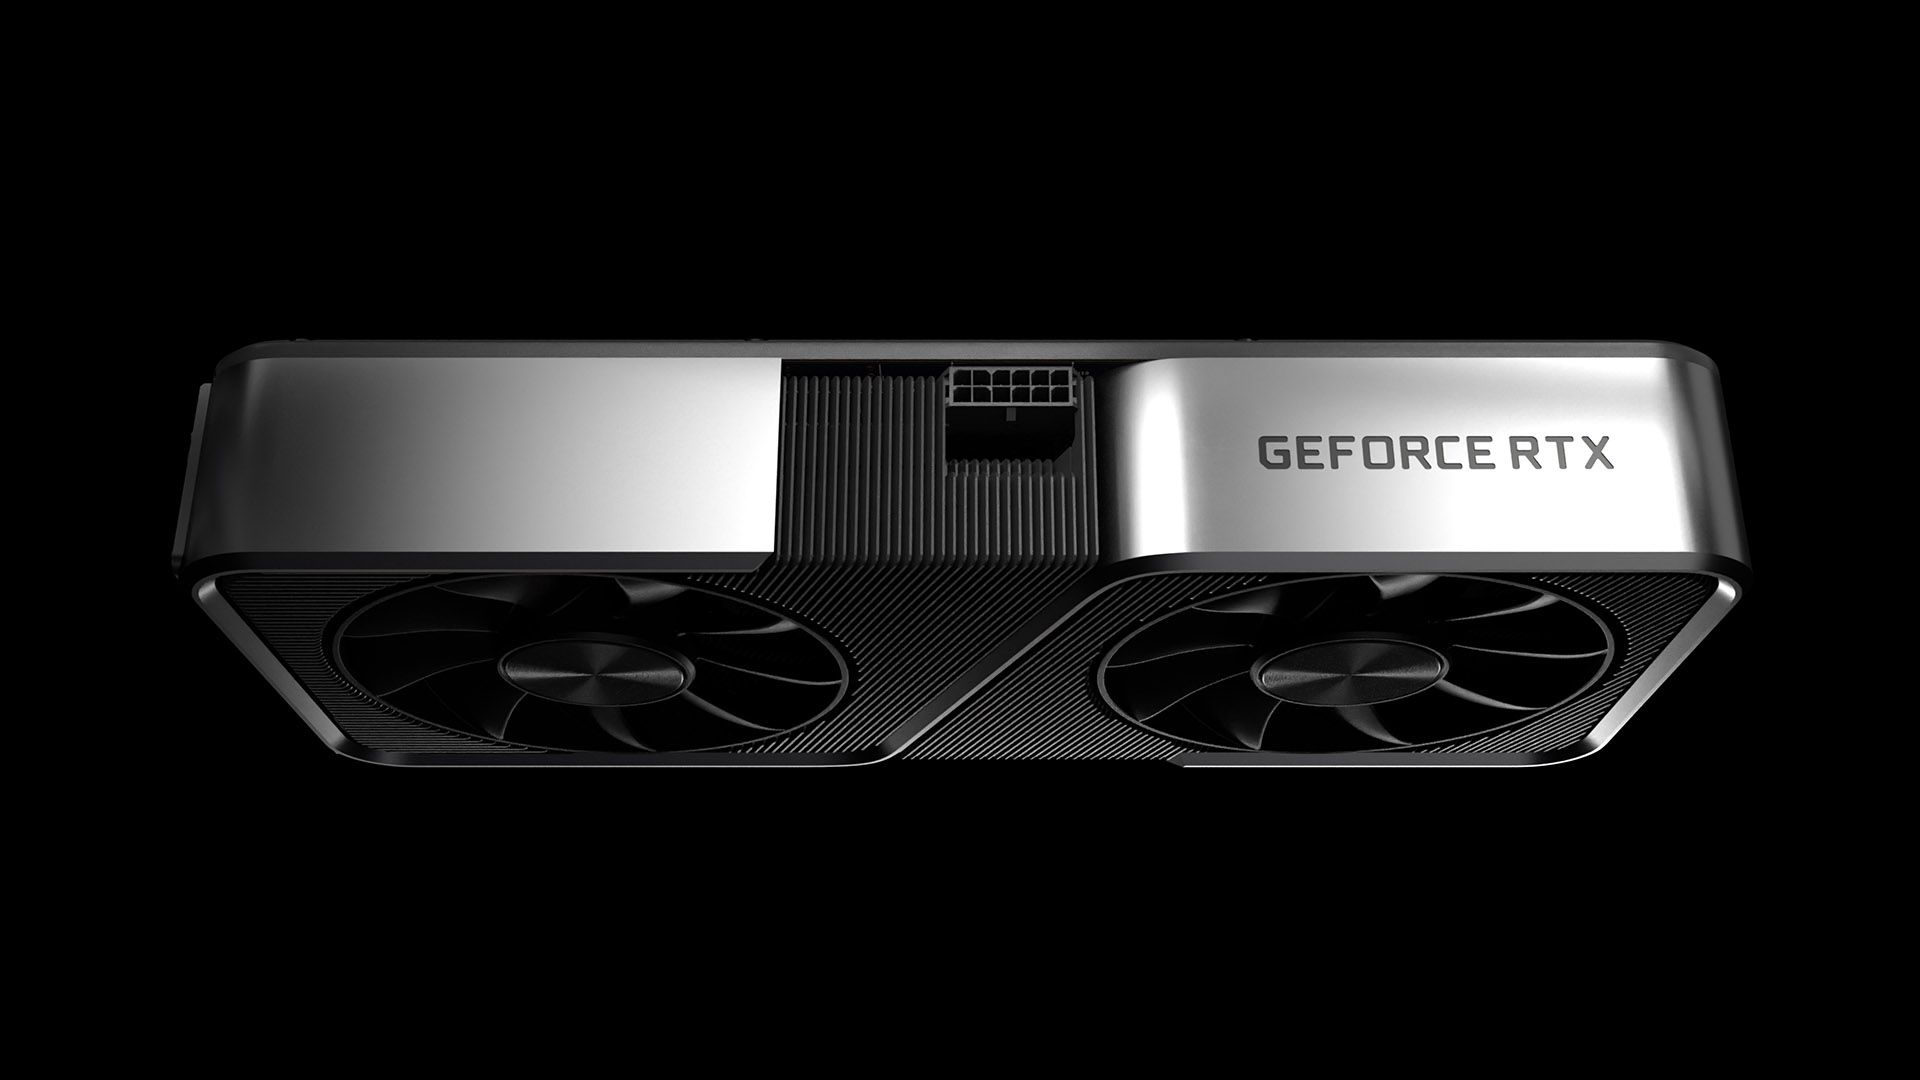 Nvidia's rumoured RTX 3080 Ti could also be programmed to deter cryptominers